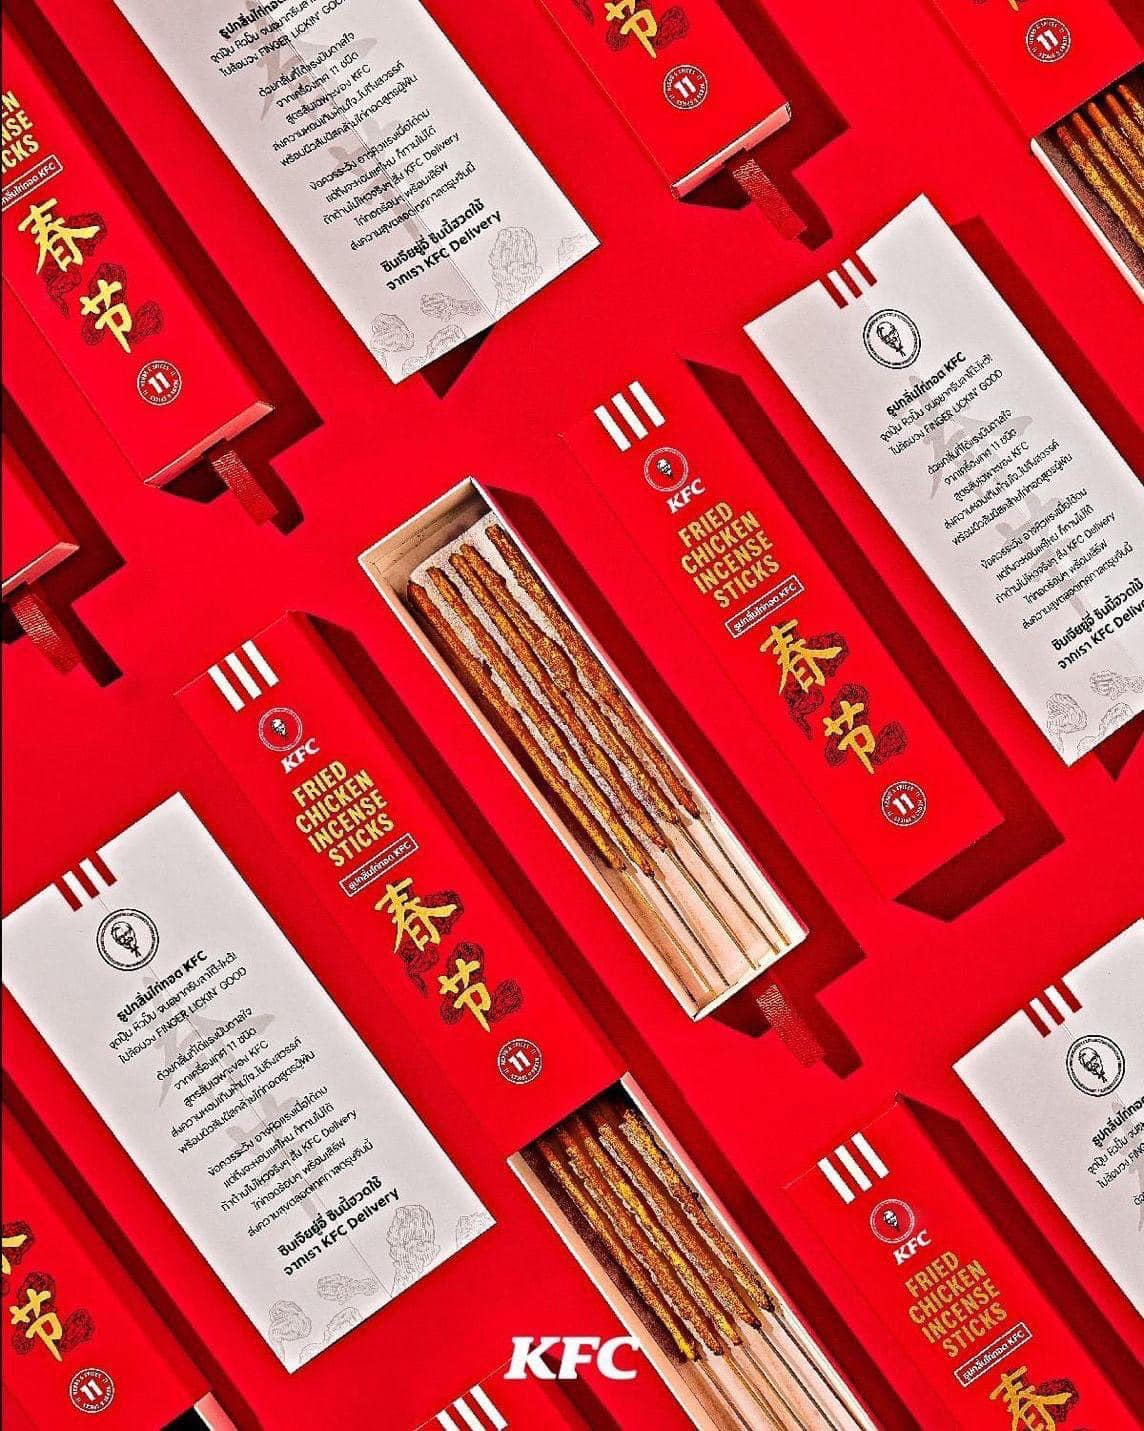 Fried chicken incense sticks in red boxes